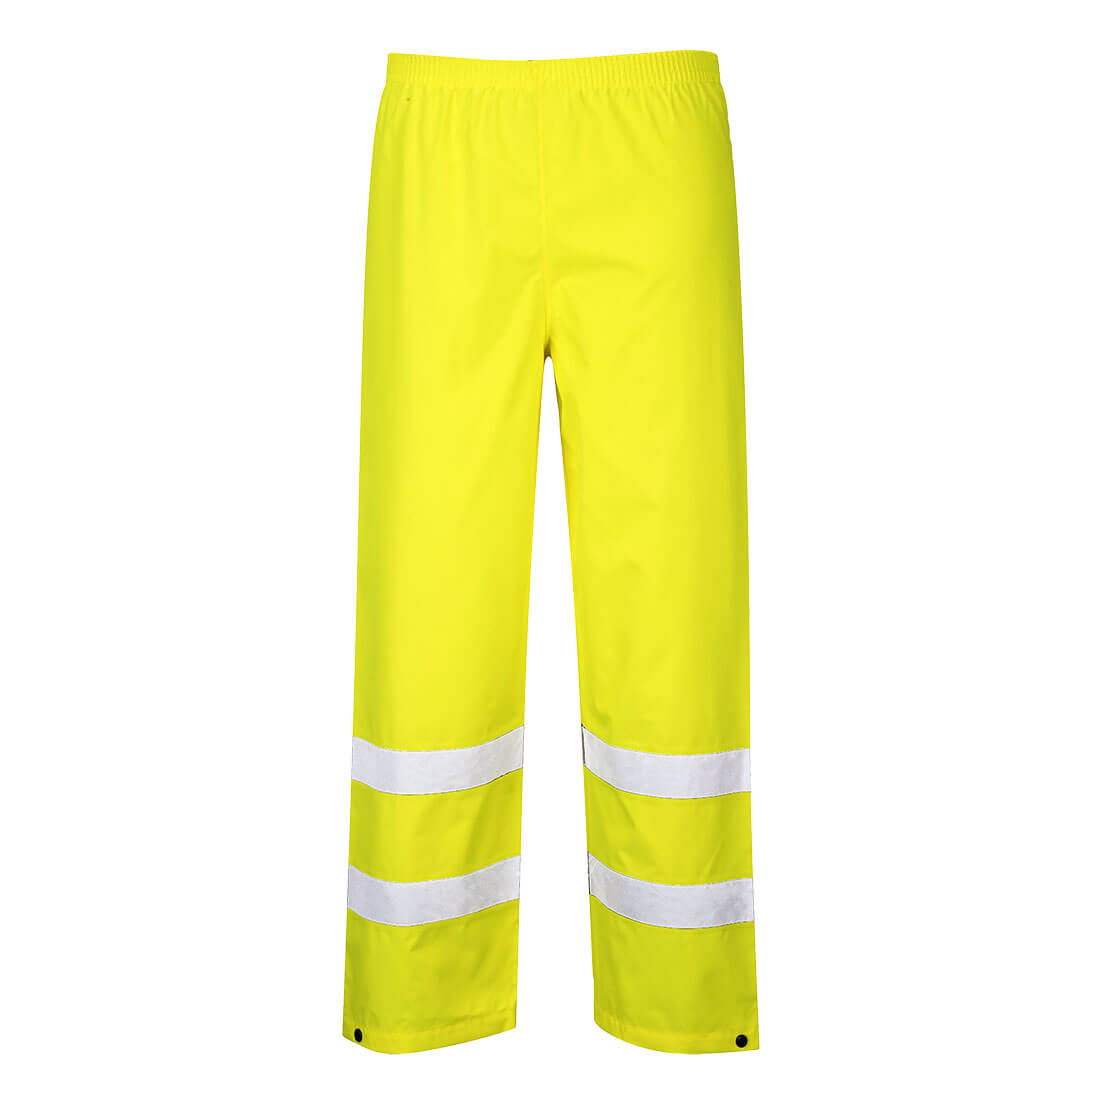 Image of Oxford Weave 300D Class 1 Hi Vis Trousers Yellow L 34"